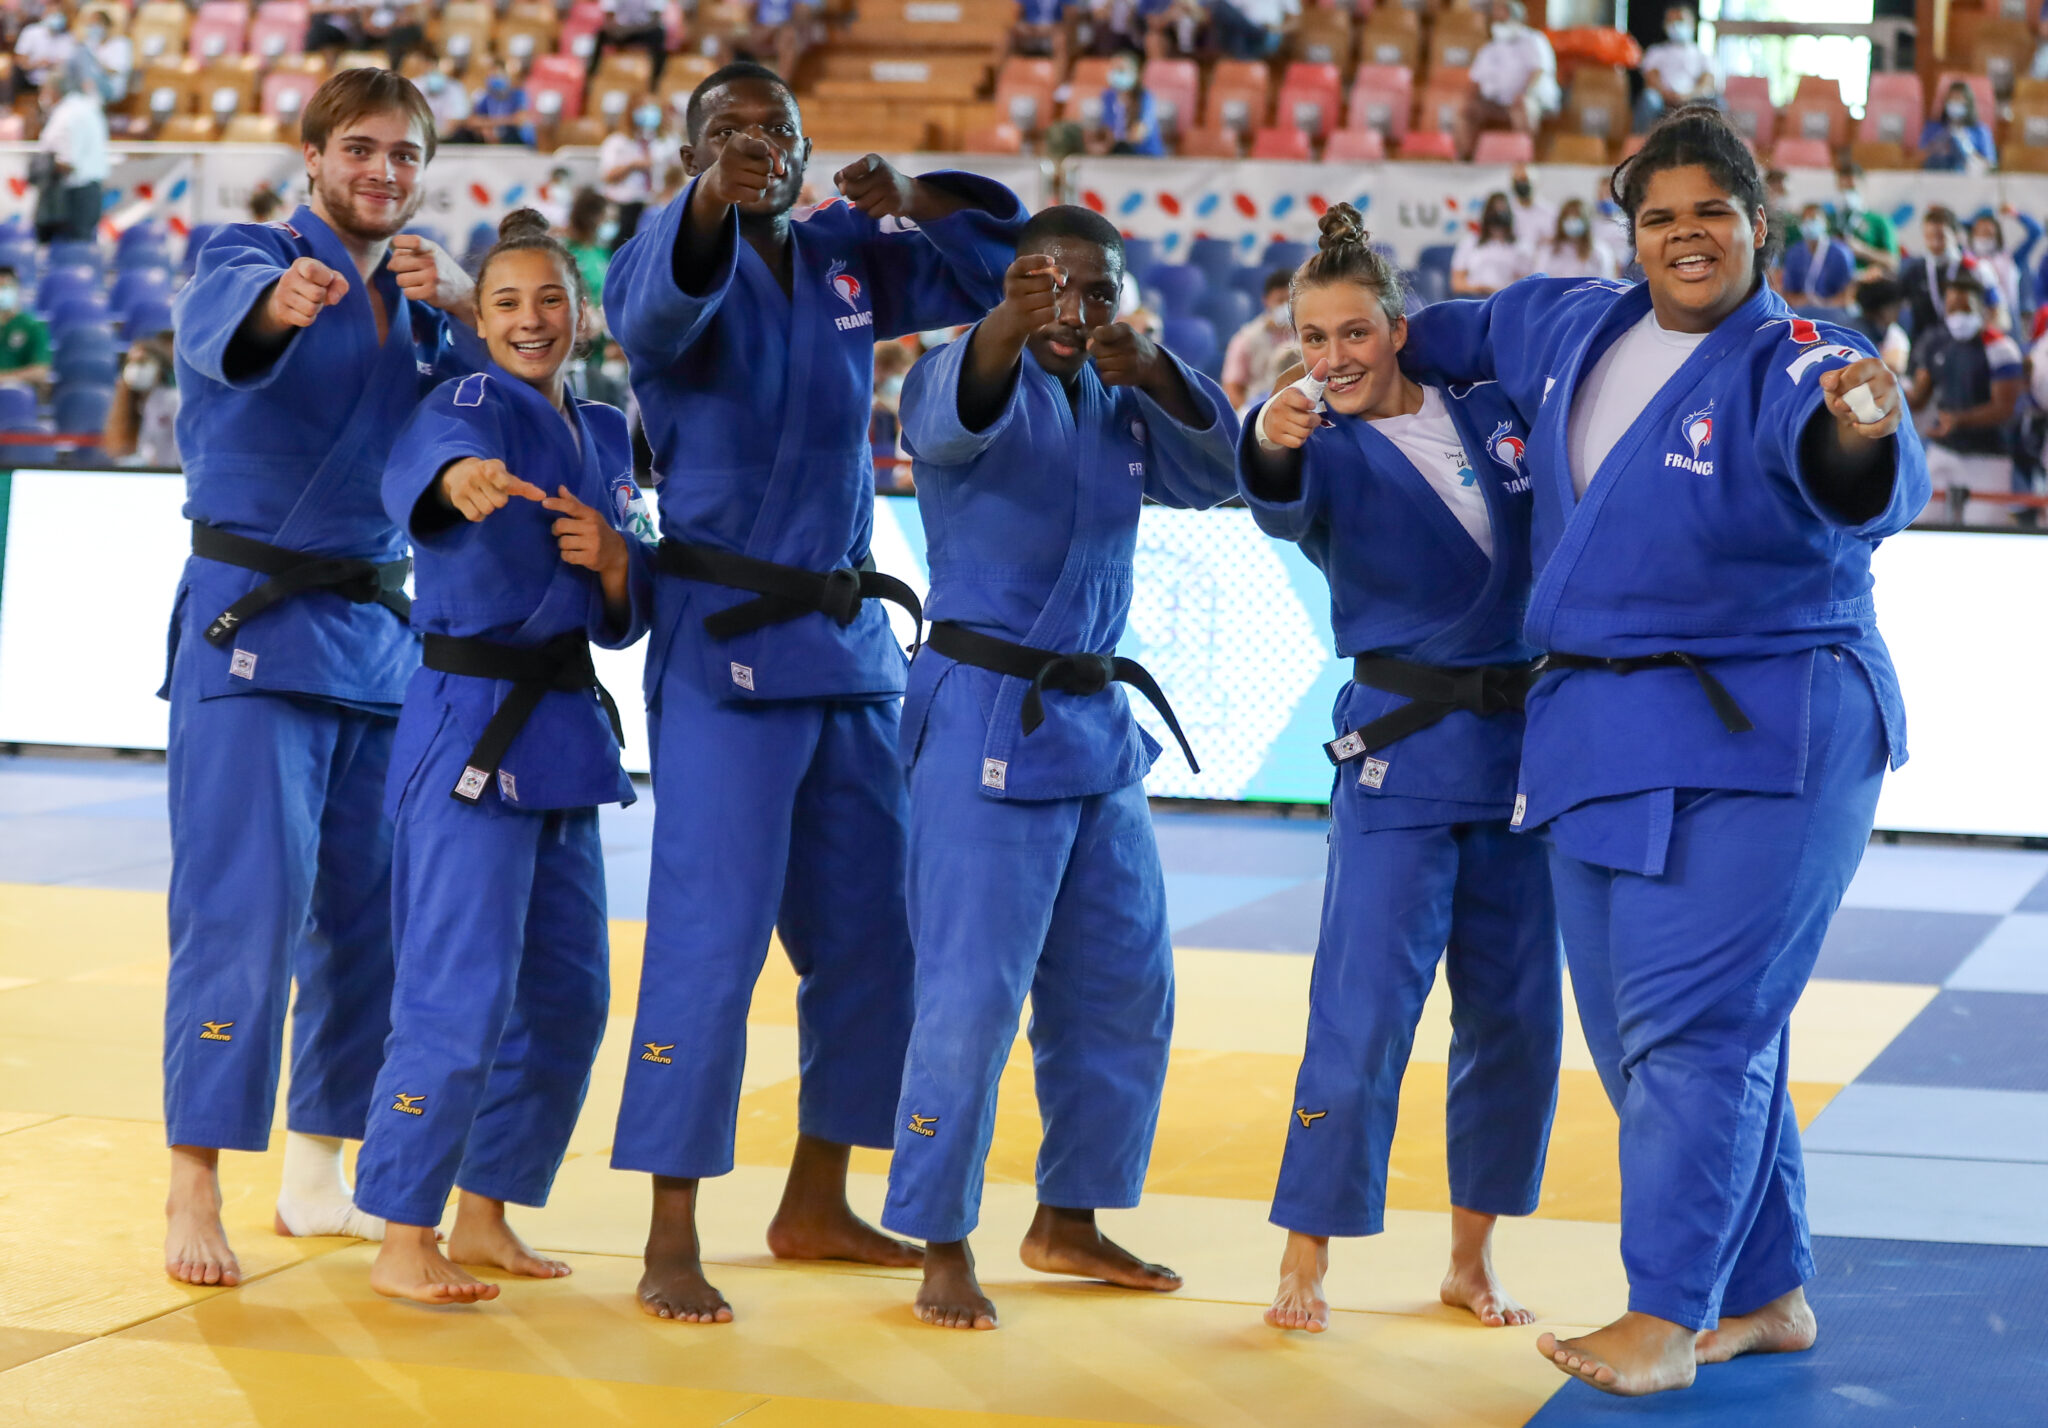 TEAM FRANCE CLEAN HOUSE FOR JUNIOR MIXED TEAMS TITLE